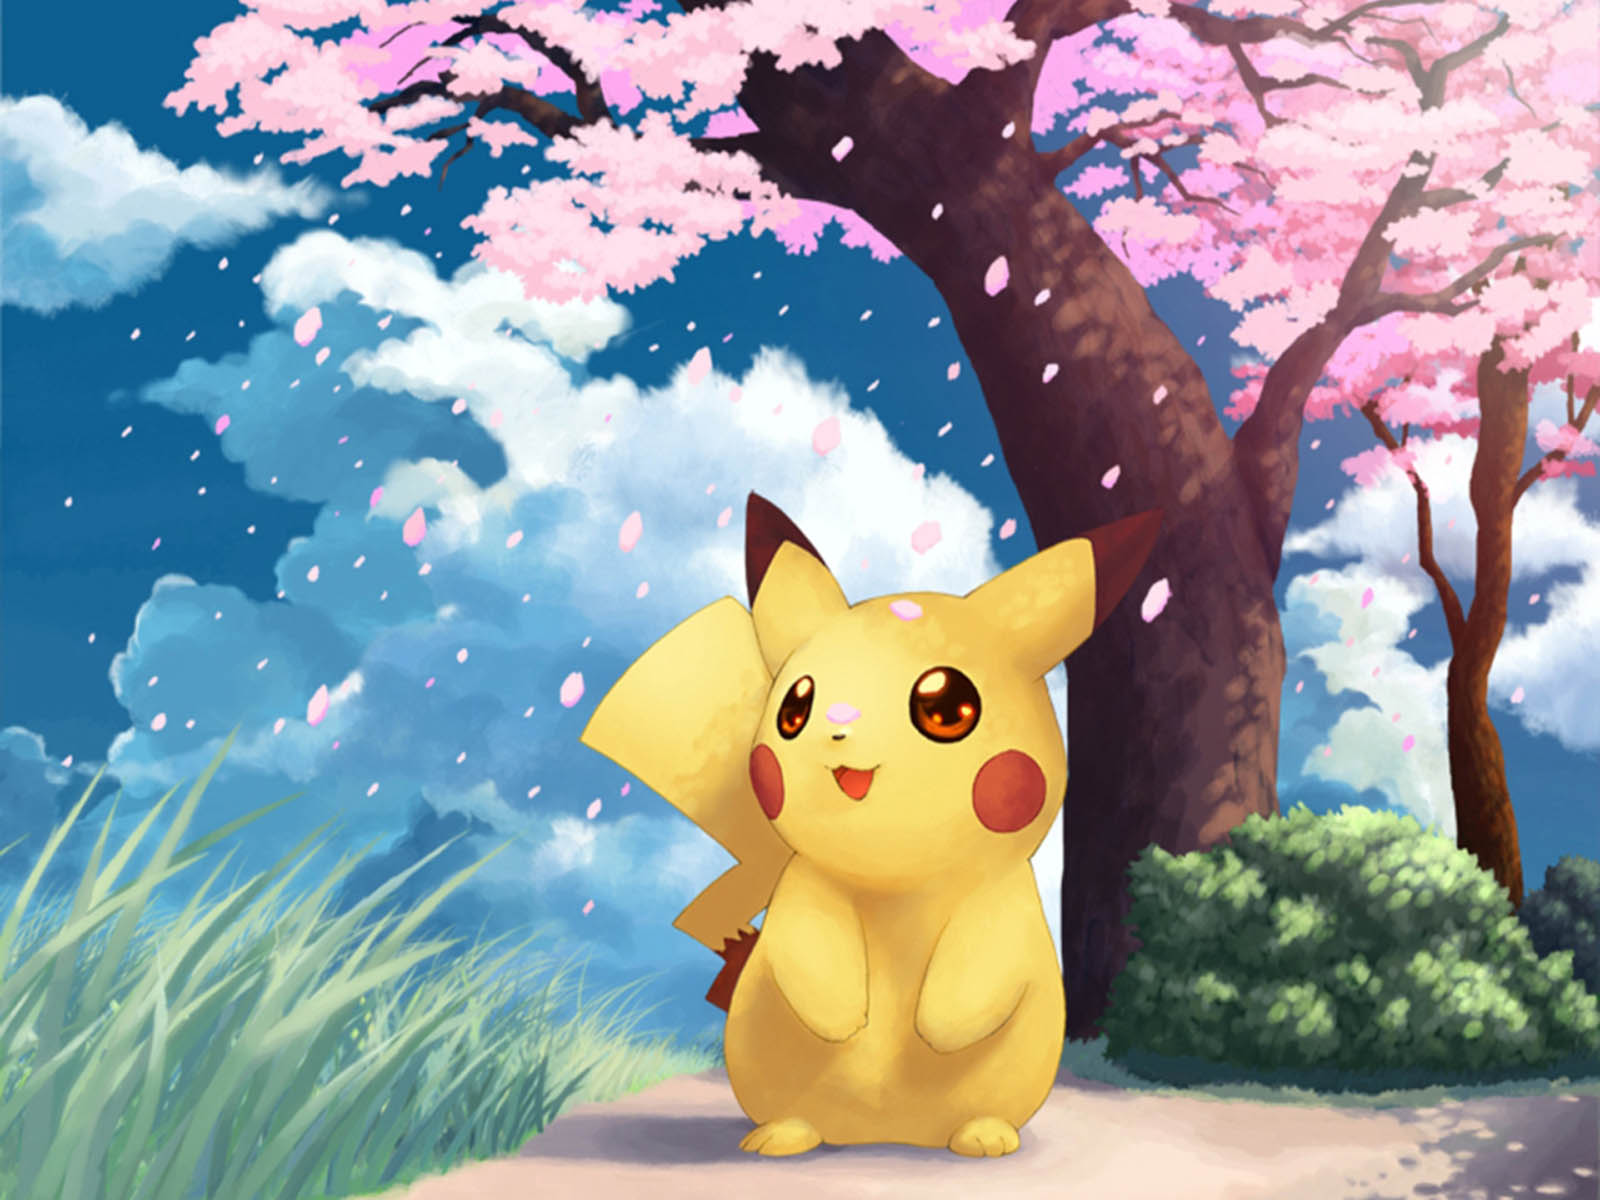 Pikachu Pokemon Wallpapers Images Photos Pictures and Backgrounds